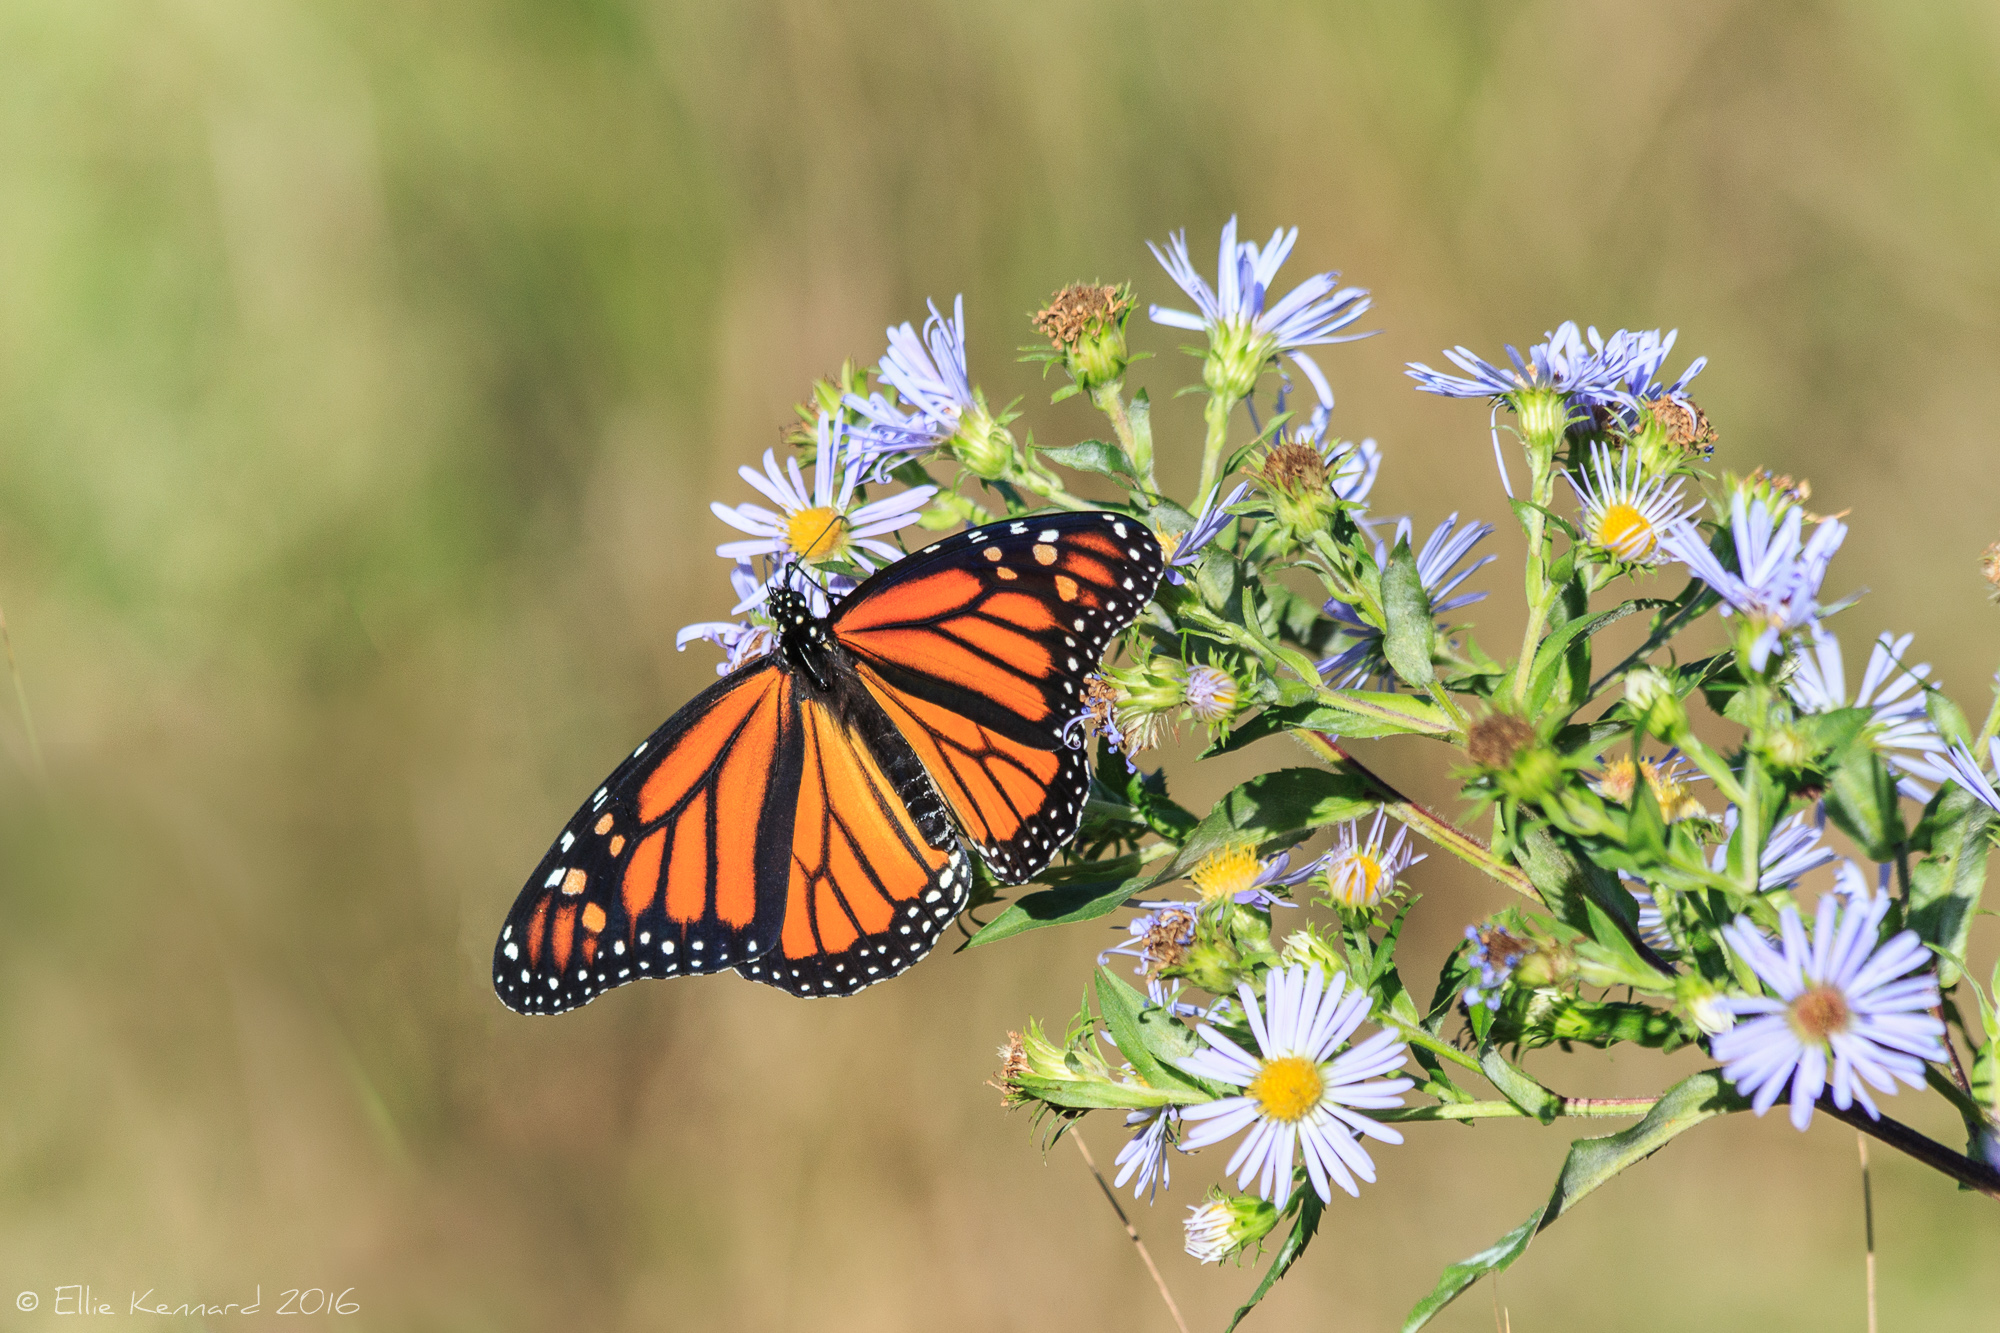 Female Monarch butterfly on wildflowers, first sightings. Note the lack of black spot on the lower wing, the heavier lines traced on the wings - Photo by Ellie Kennard 2016